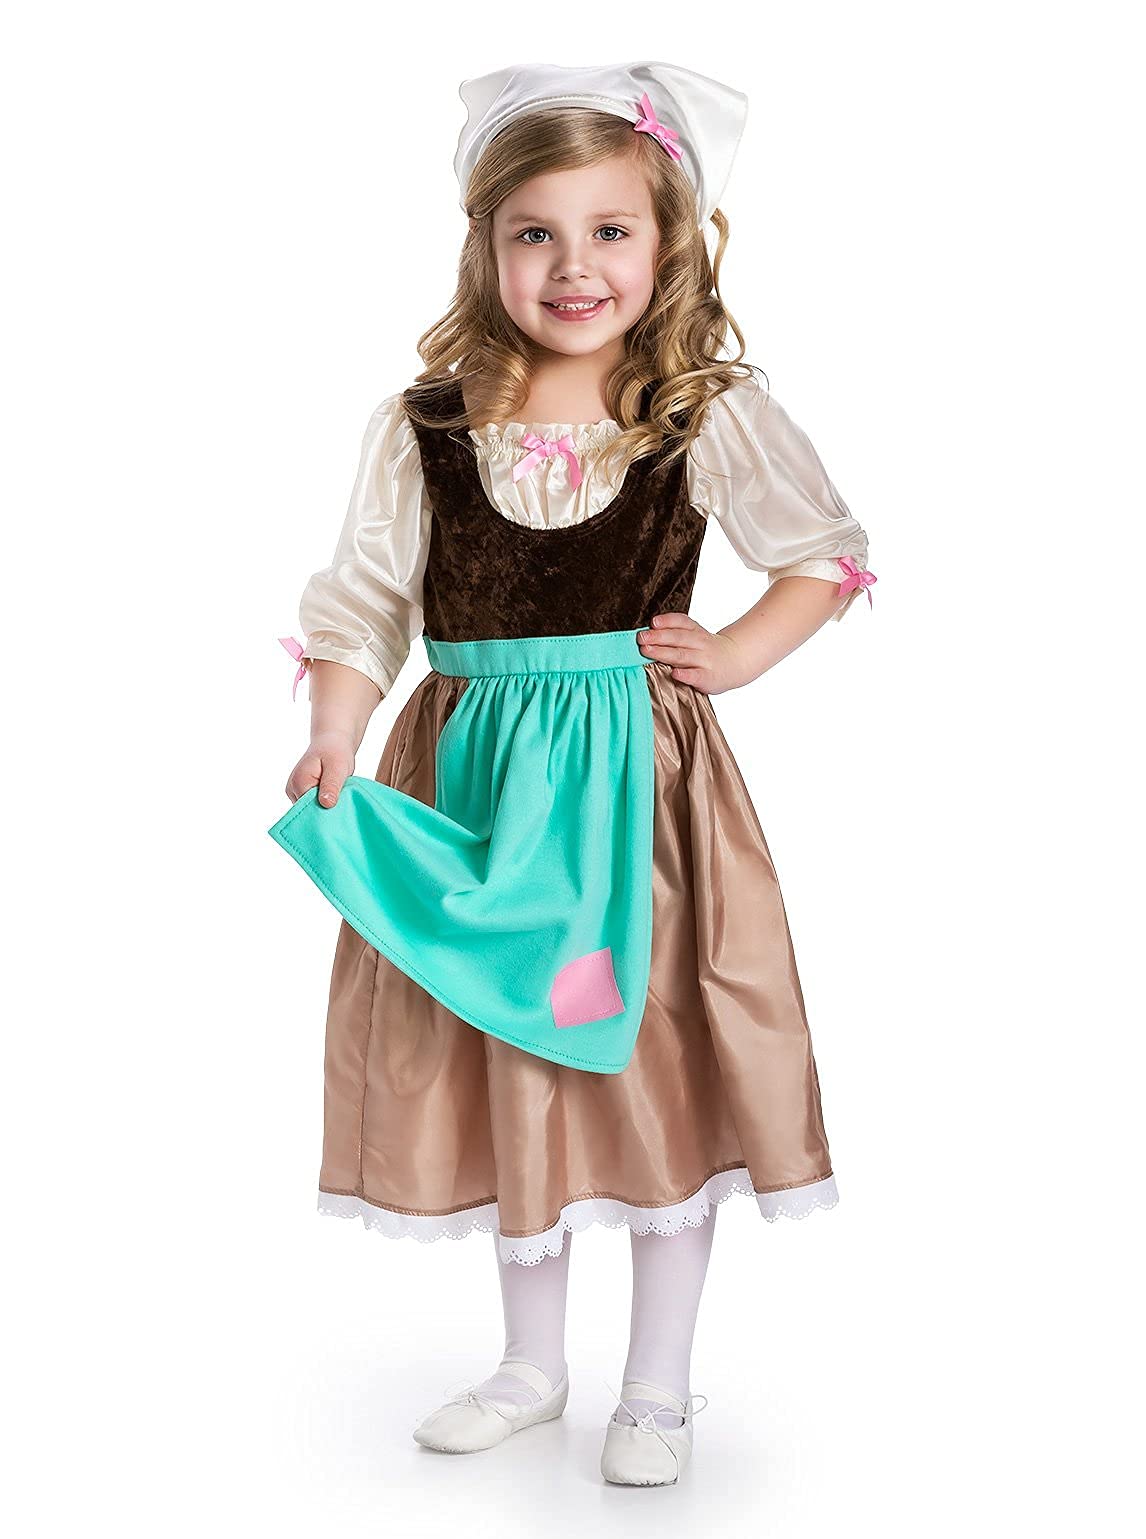 Little Adventures Cinderella Day Dress Up Costume (Large Age 5-7) with Matching Doll Dress - Machine Washable Child Pretend Play and Party Dress with No Glitter